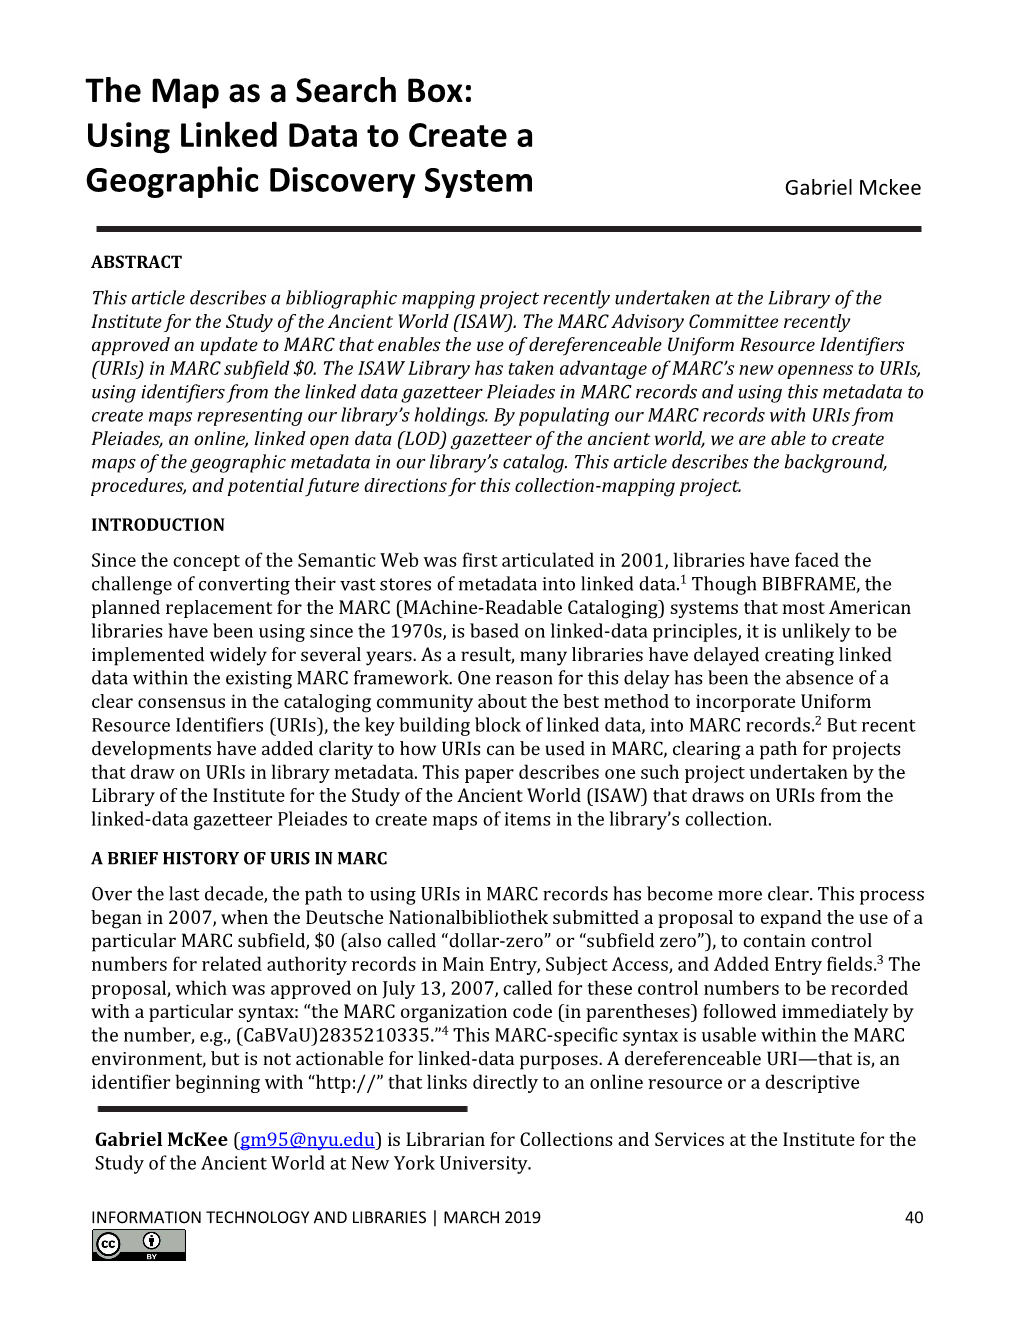 Using Linked Data to Create a Geographic Discovery System Gabriel Mckee